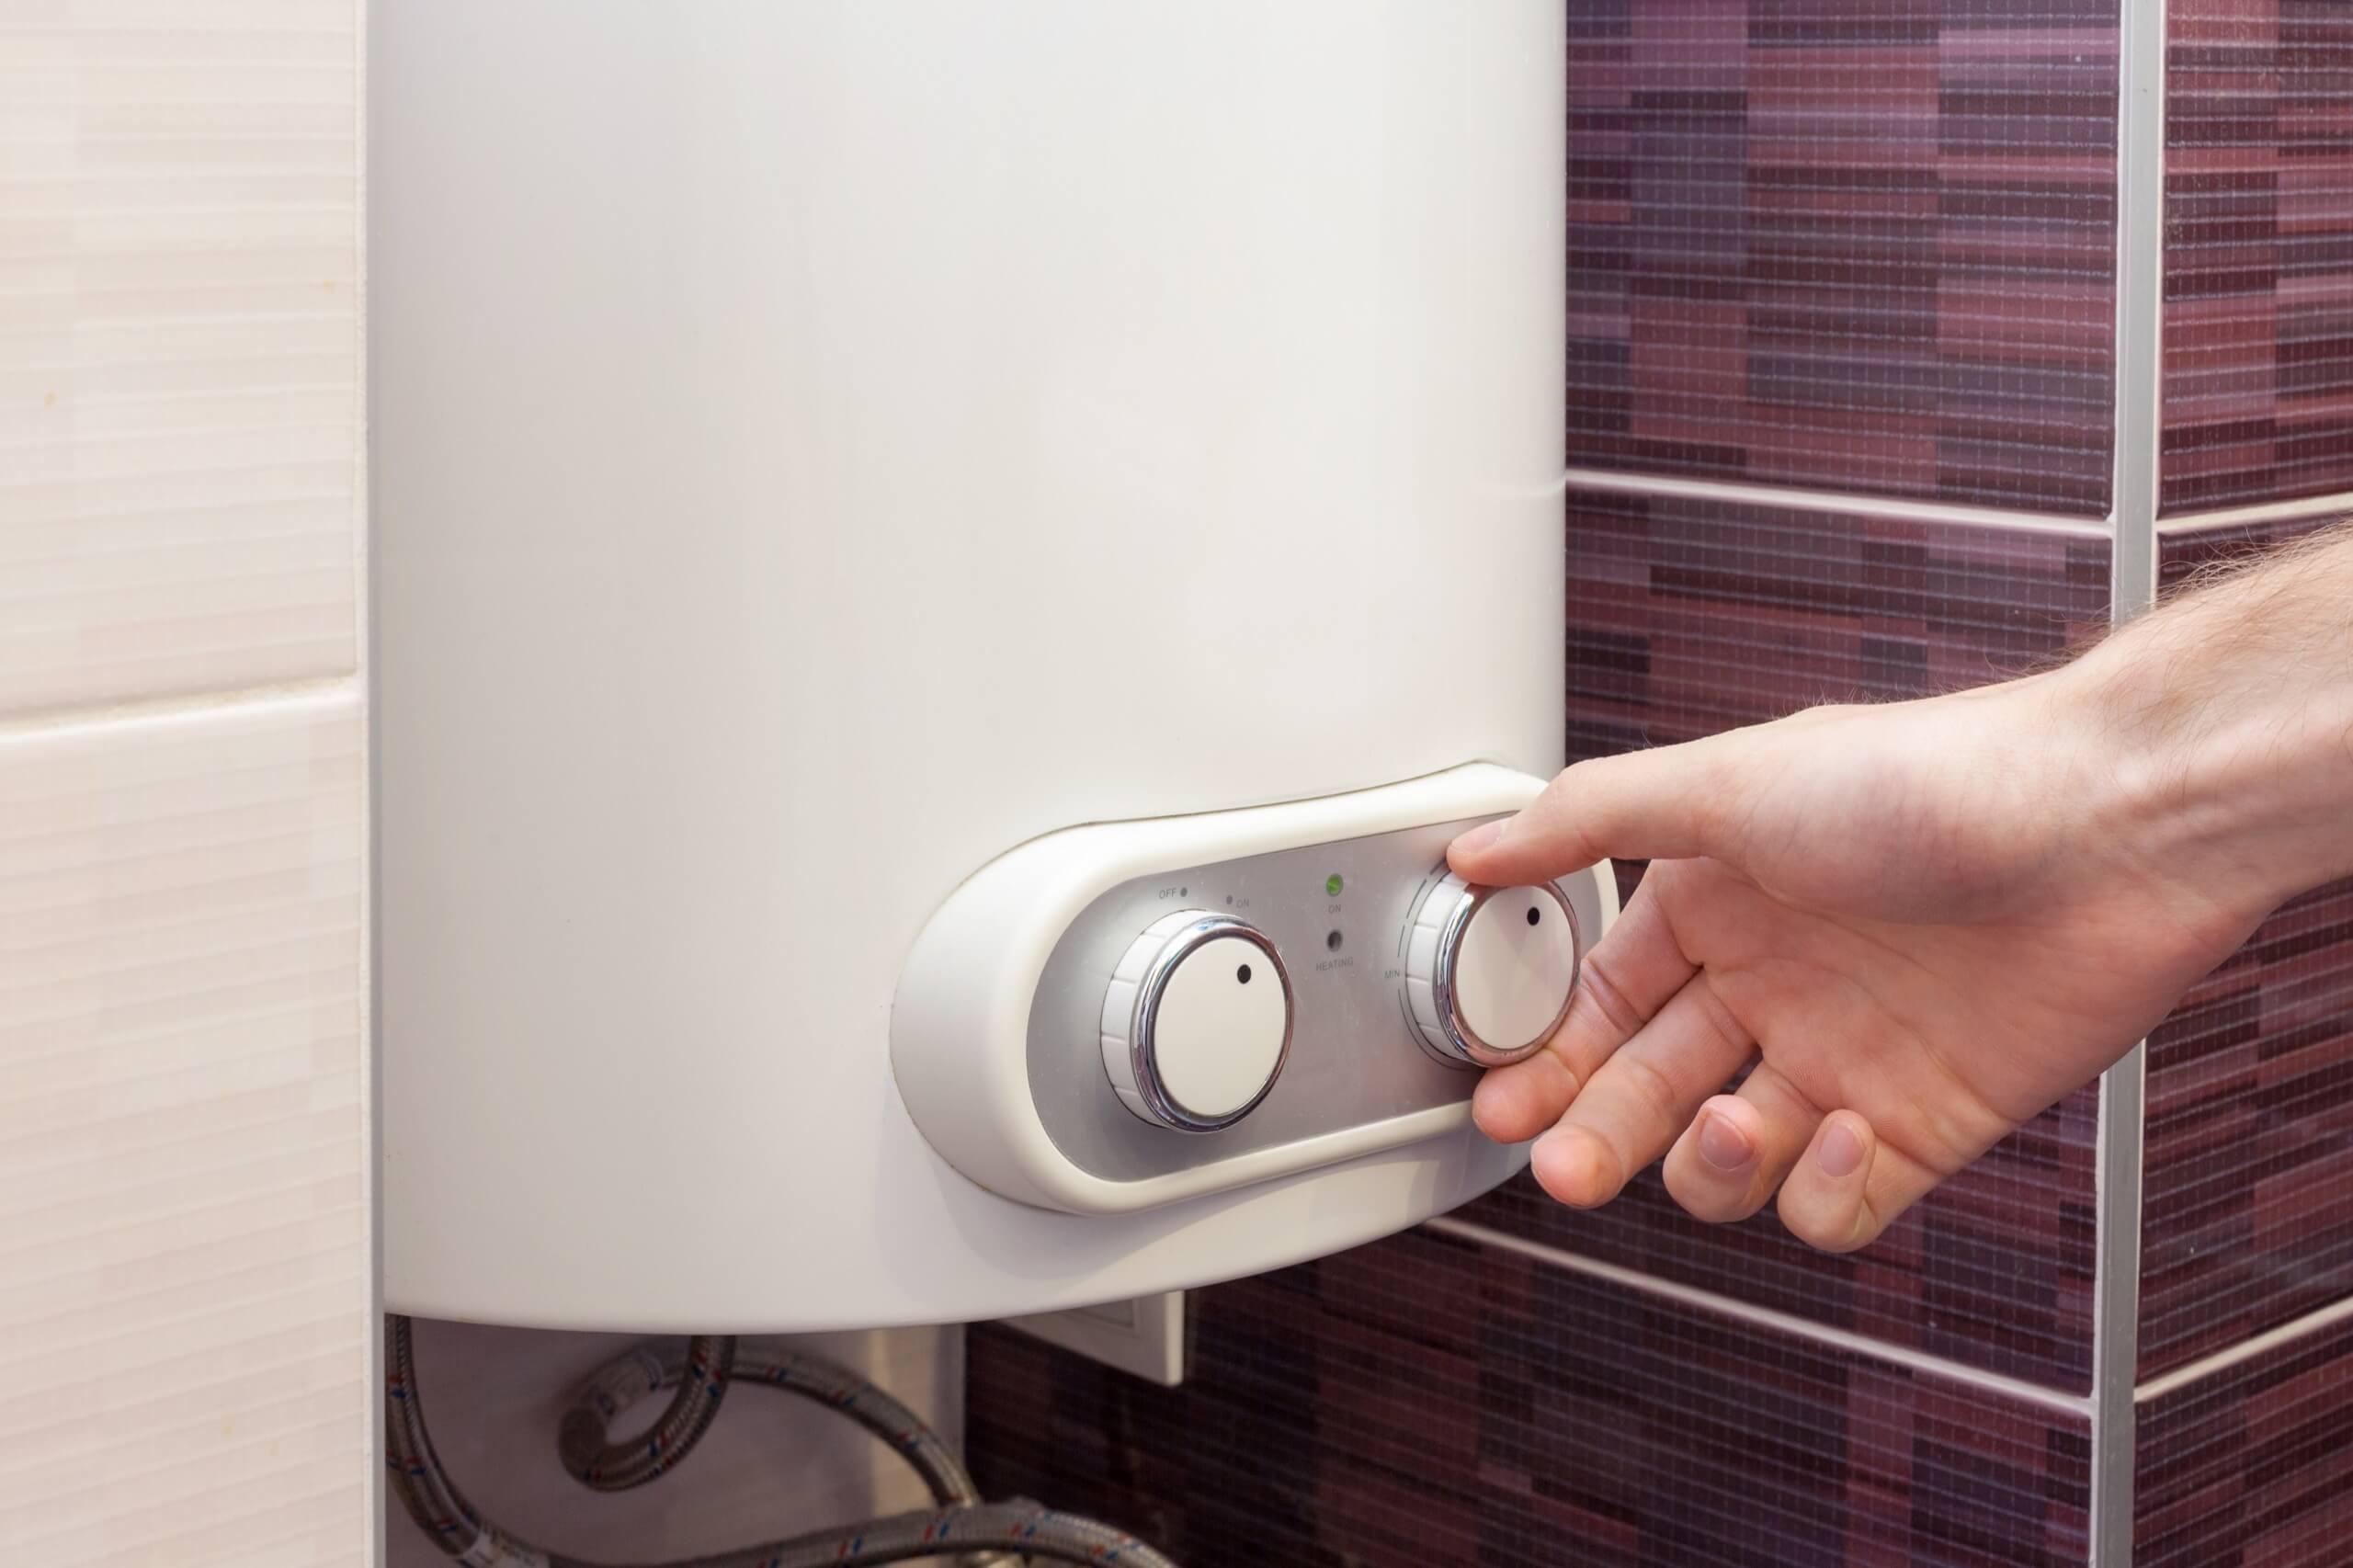 A man adjust his electric water heater